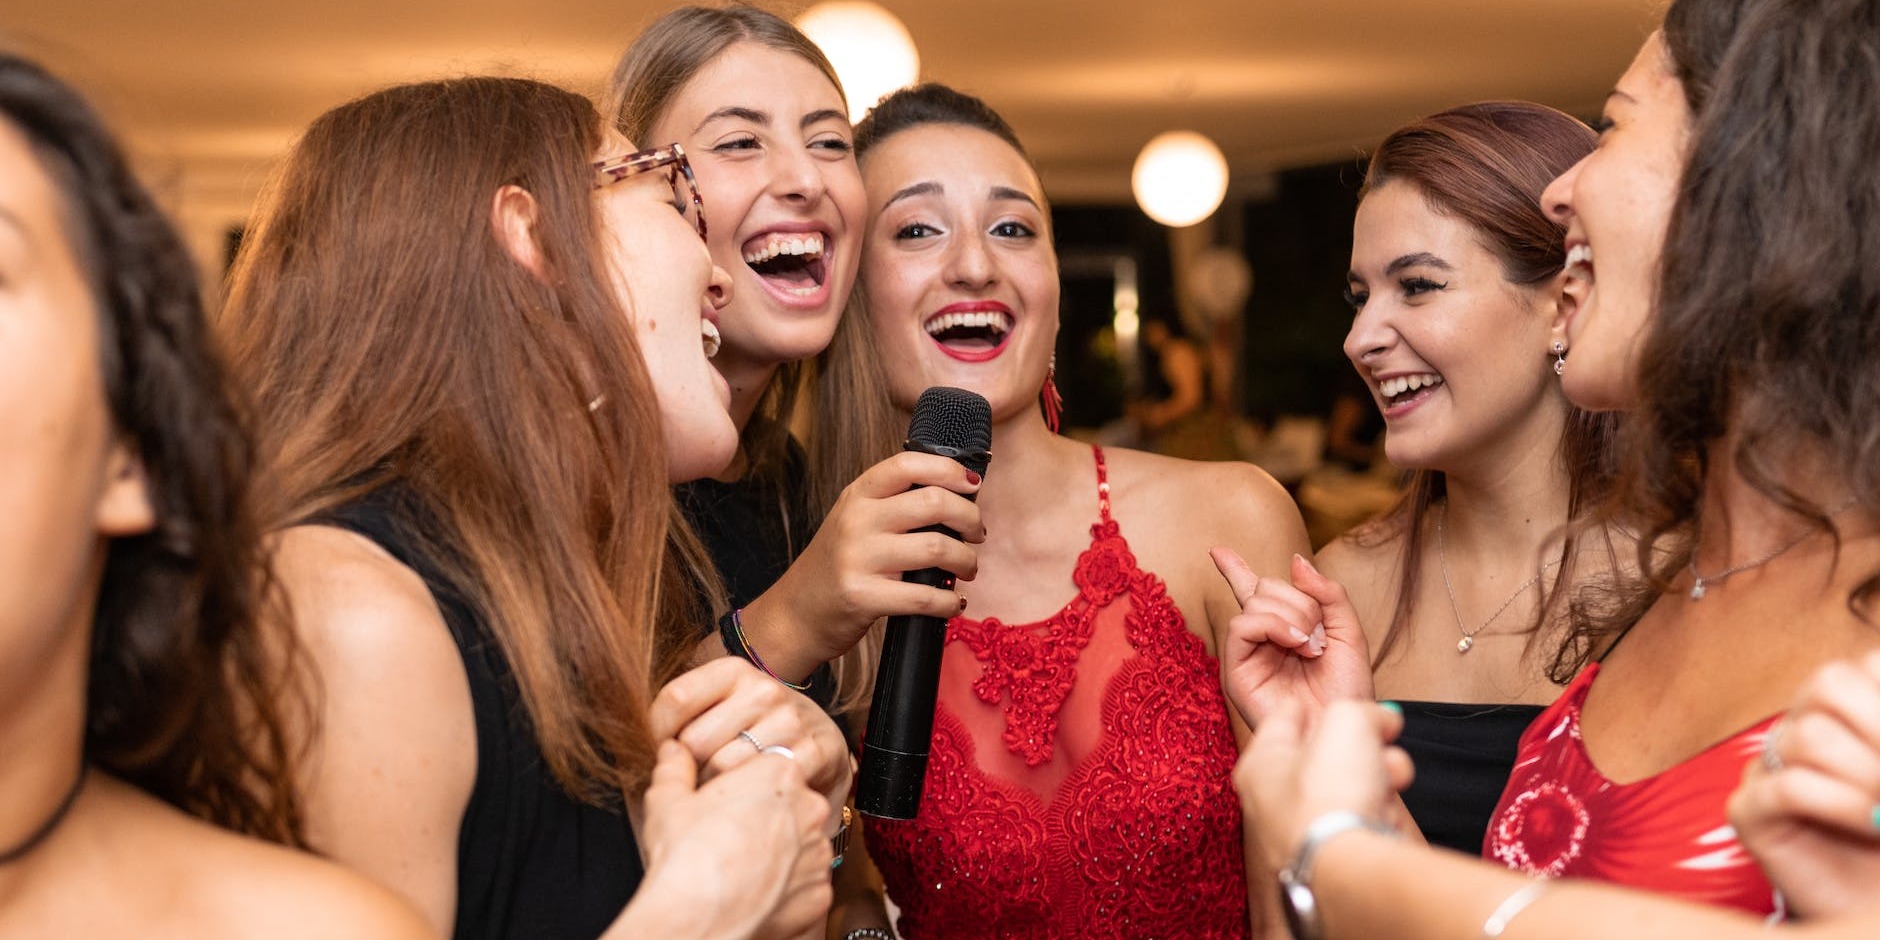 Top Hen Party Ideas for a Memorable Night Out